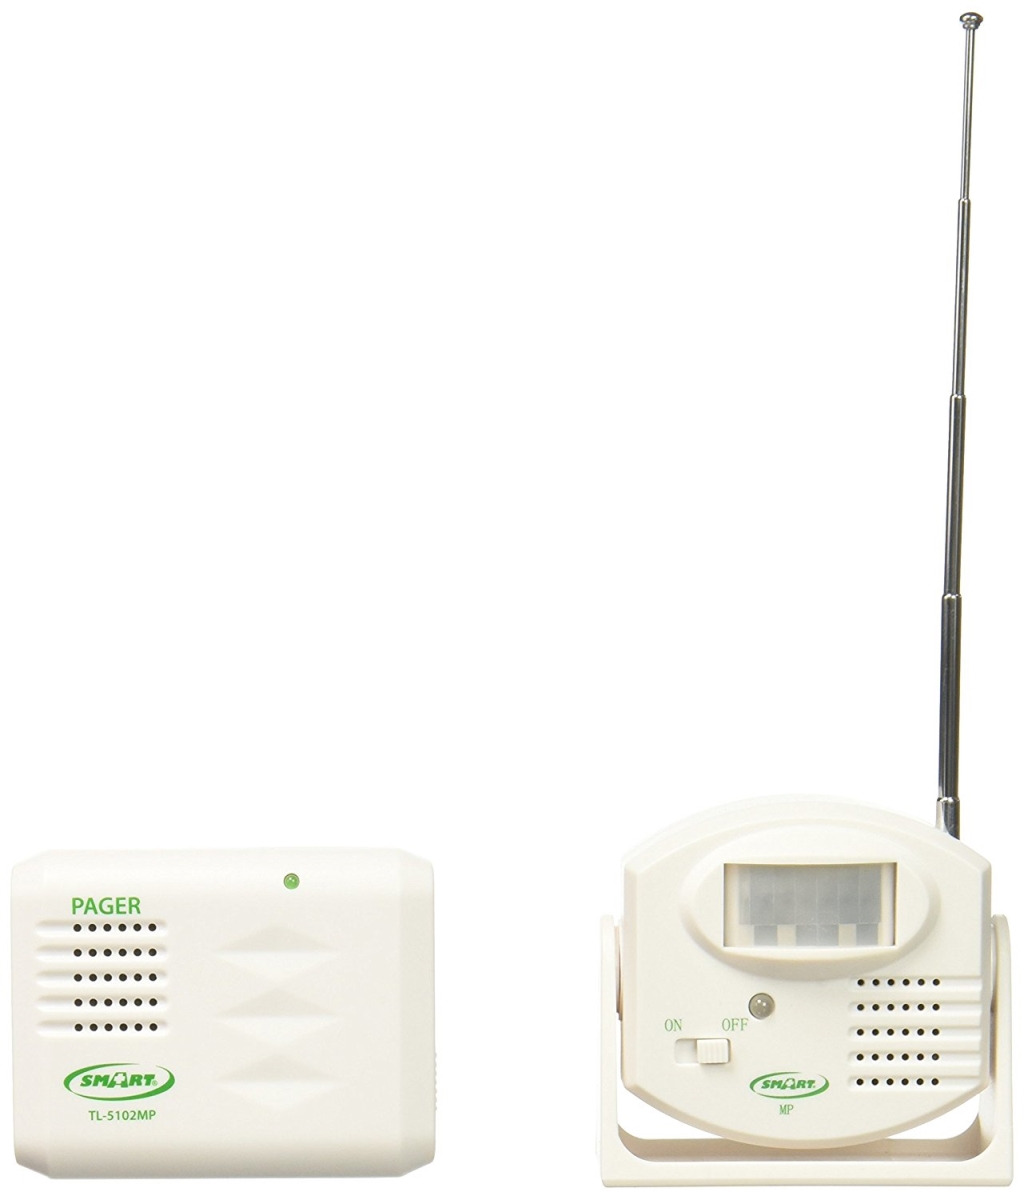 Rp-tl-5102mp Retail Motion Sensor To Pager System